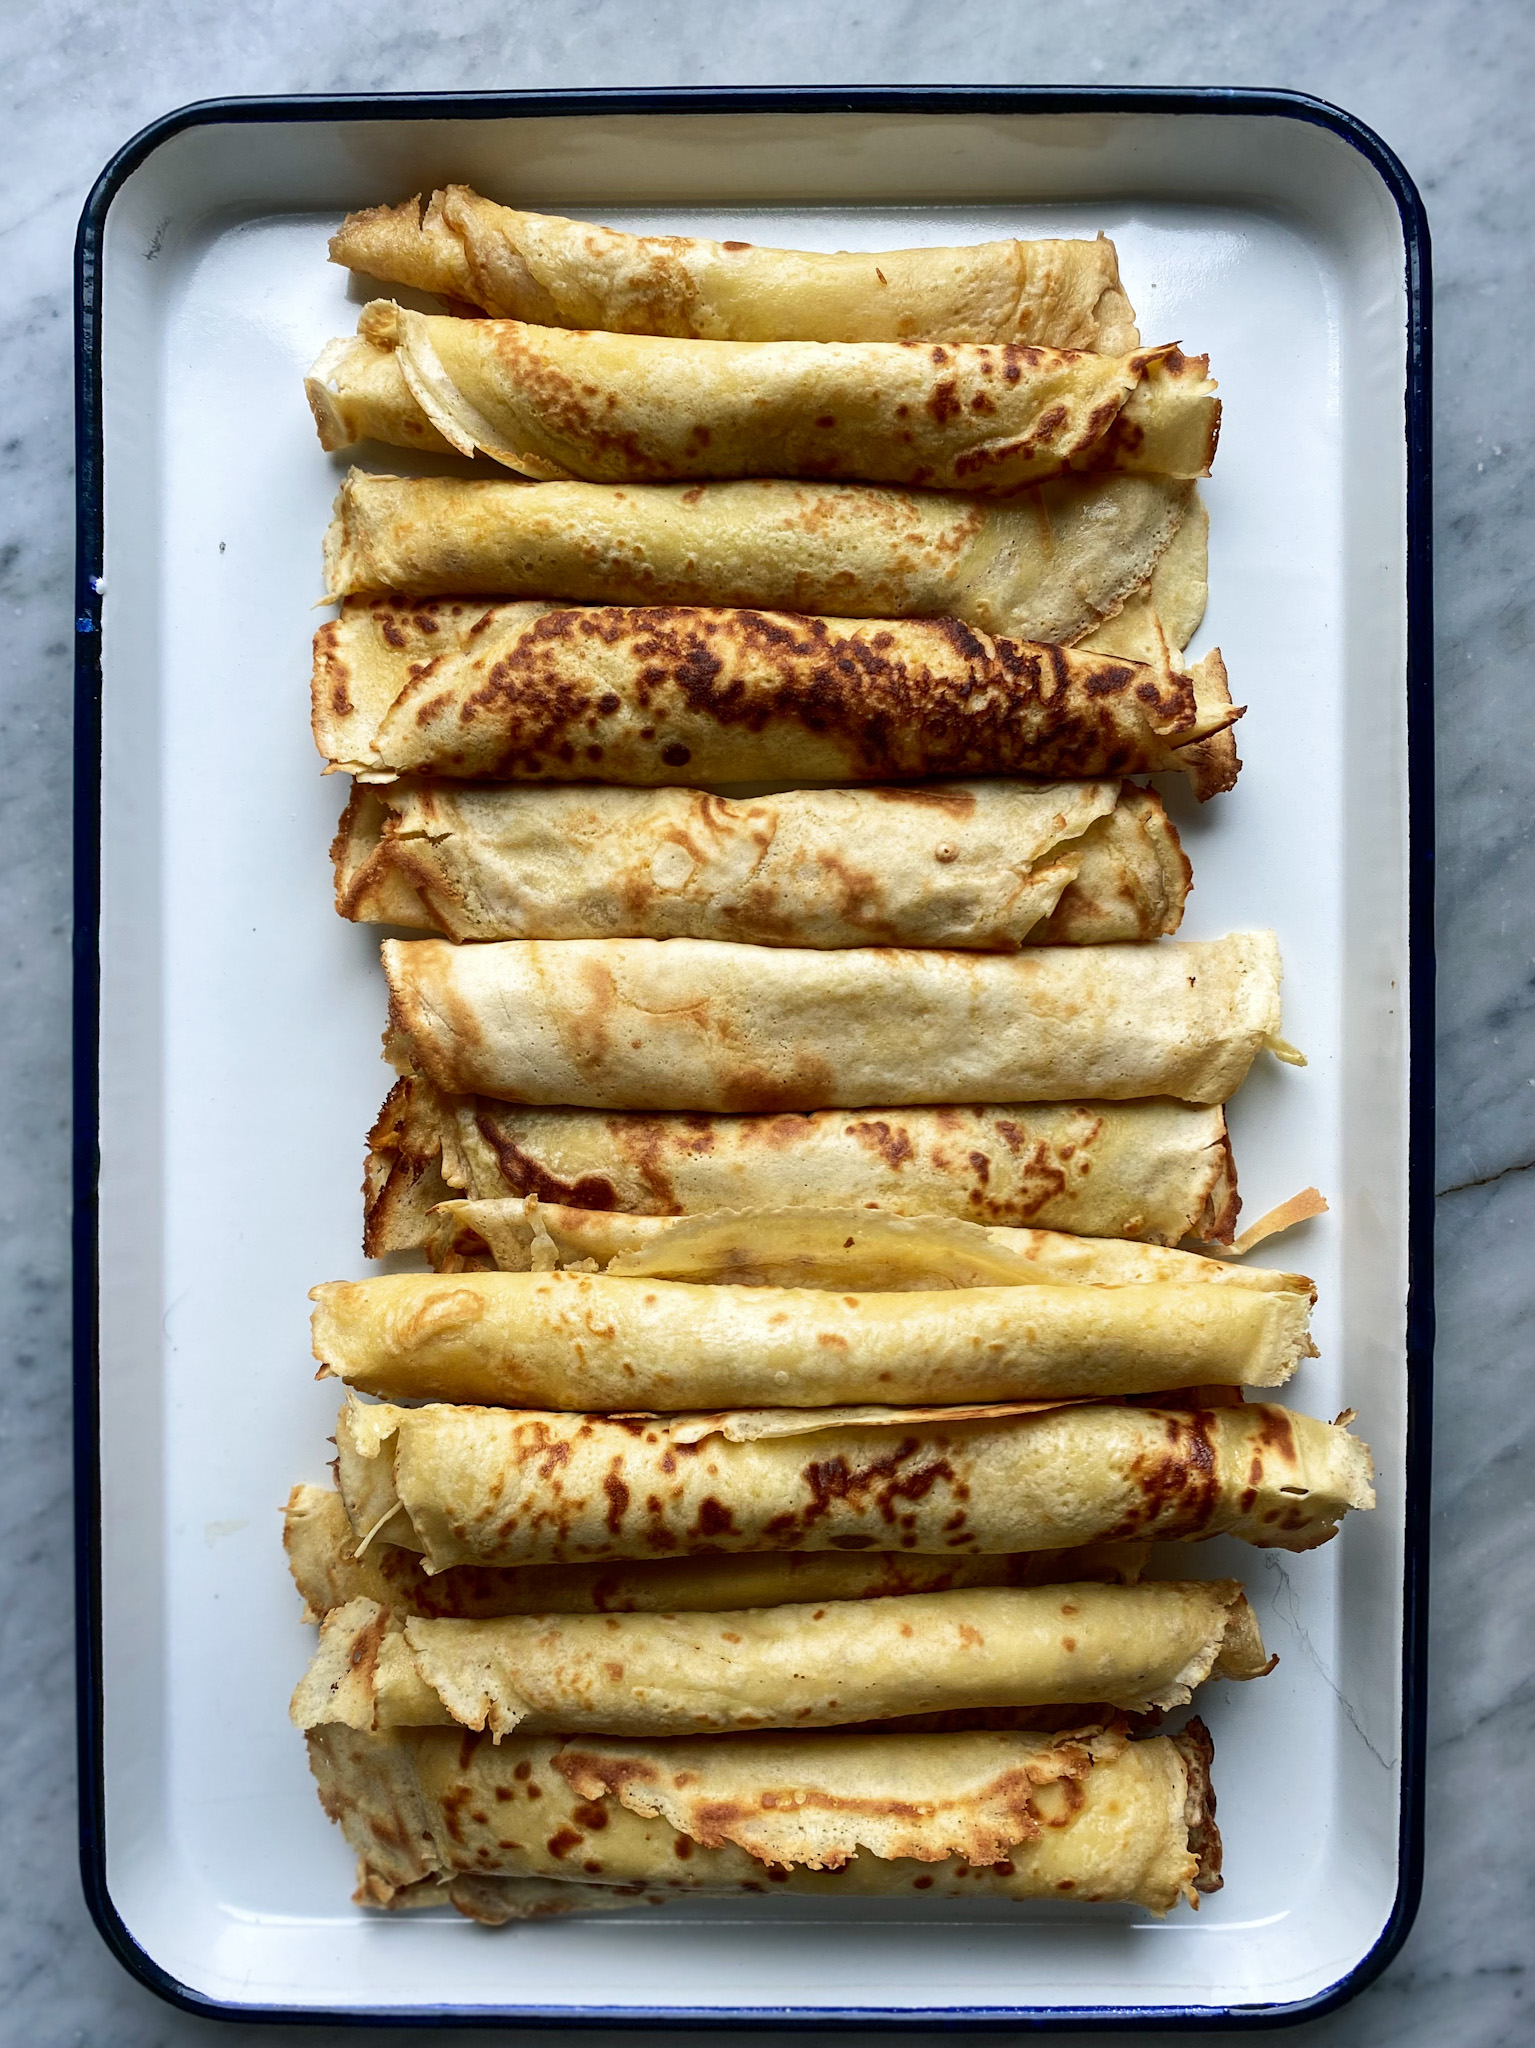 Rolled up crepes on a pan.